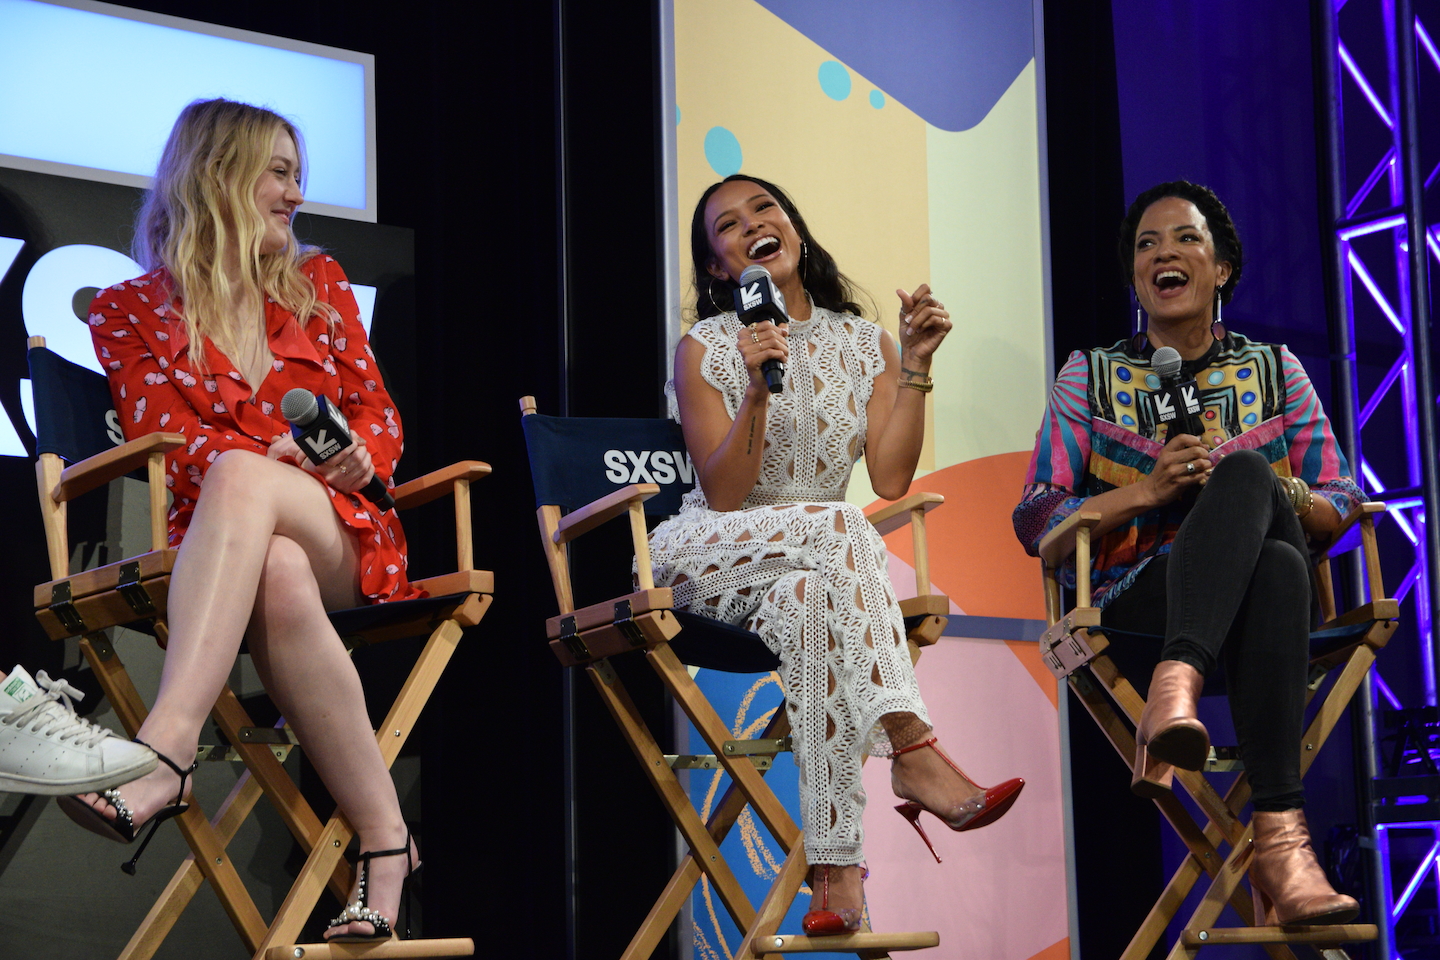 (L-R) Dakota Fanning, Karrueche Tran and Warner Brothers Executive Producer Janine Sherman Barrois during the “Informal & Candid Conversation with Female Leaders in Television” panel. Photo by Mike Jordan/Getty Images for SXSW